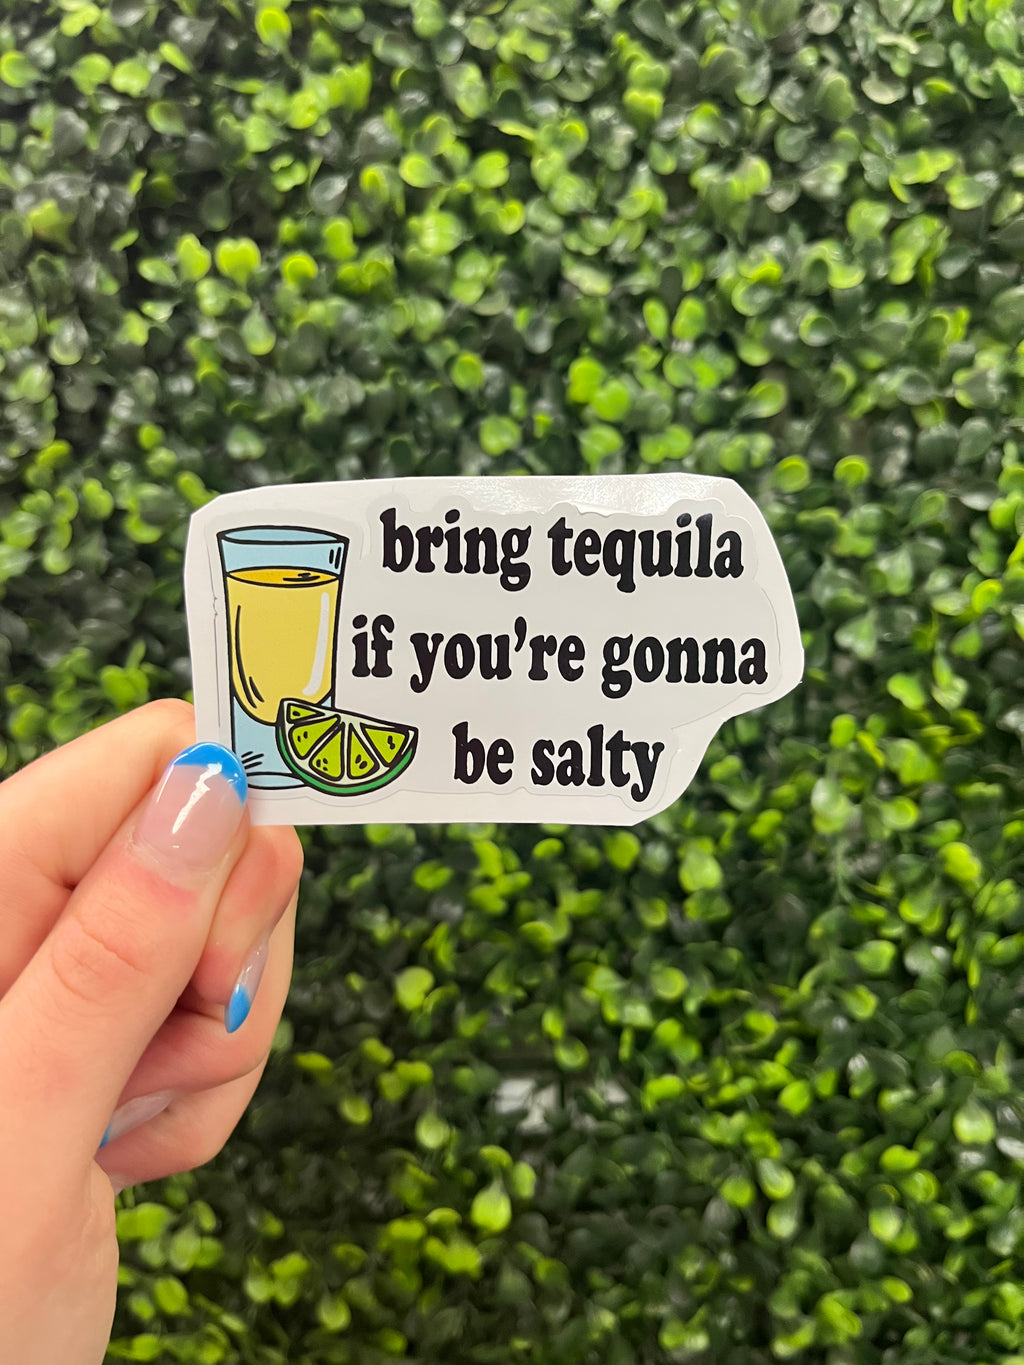 Bring the party wherever you go with this fun "BRING TEQUILA" sticker decal! Perfect for sticking on your laptop, water bottle, or anywhere else you can think of, it's the perfect way to prove you don't take yourself too seriously. P.S. We all know what to do when someone's saltier than the Dead Sea - bring tequila!